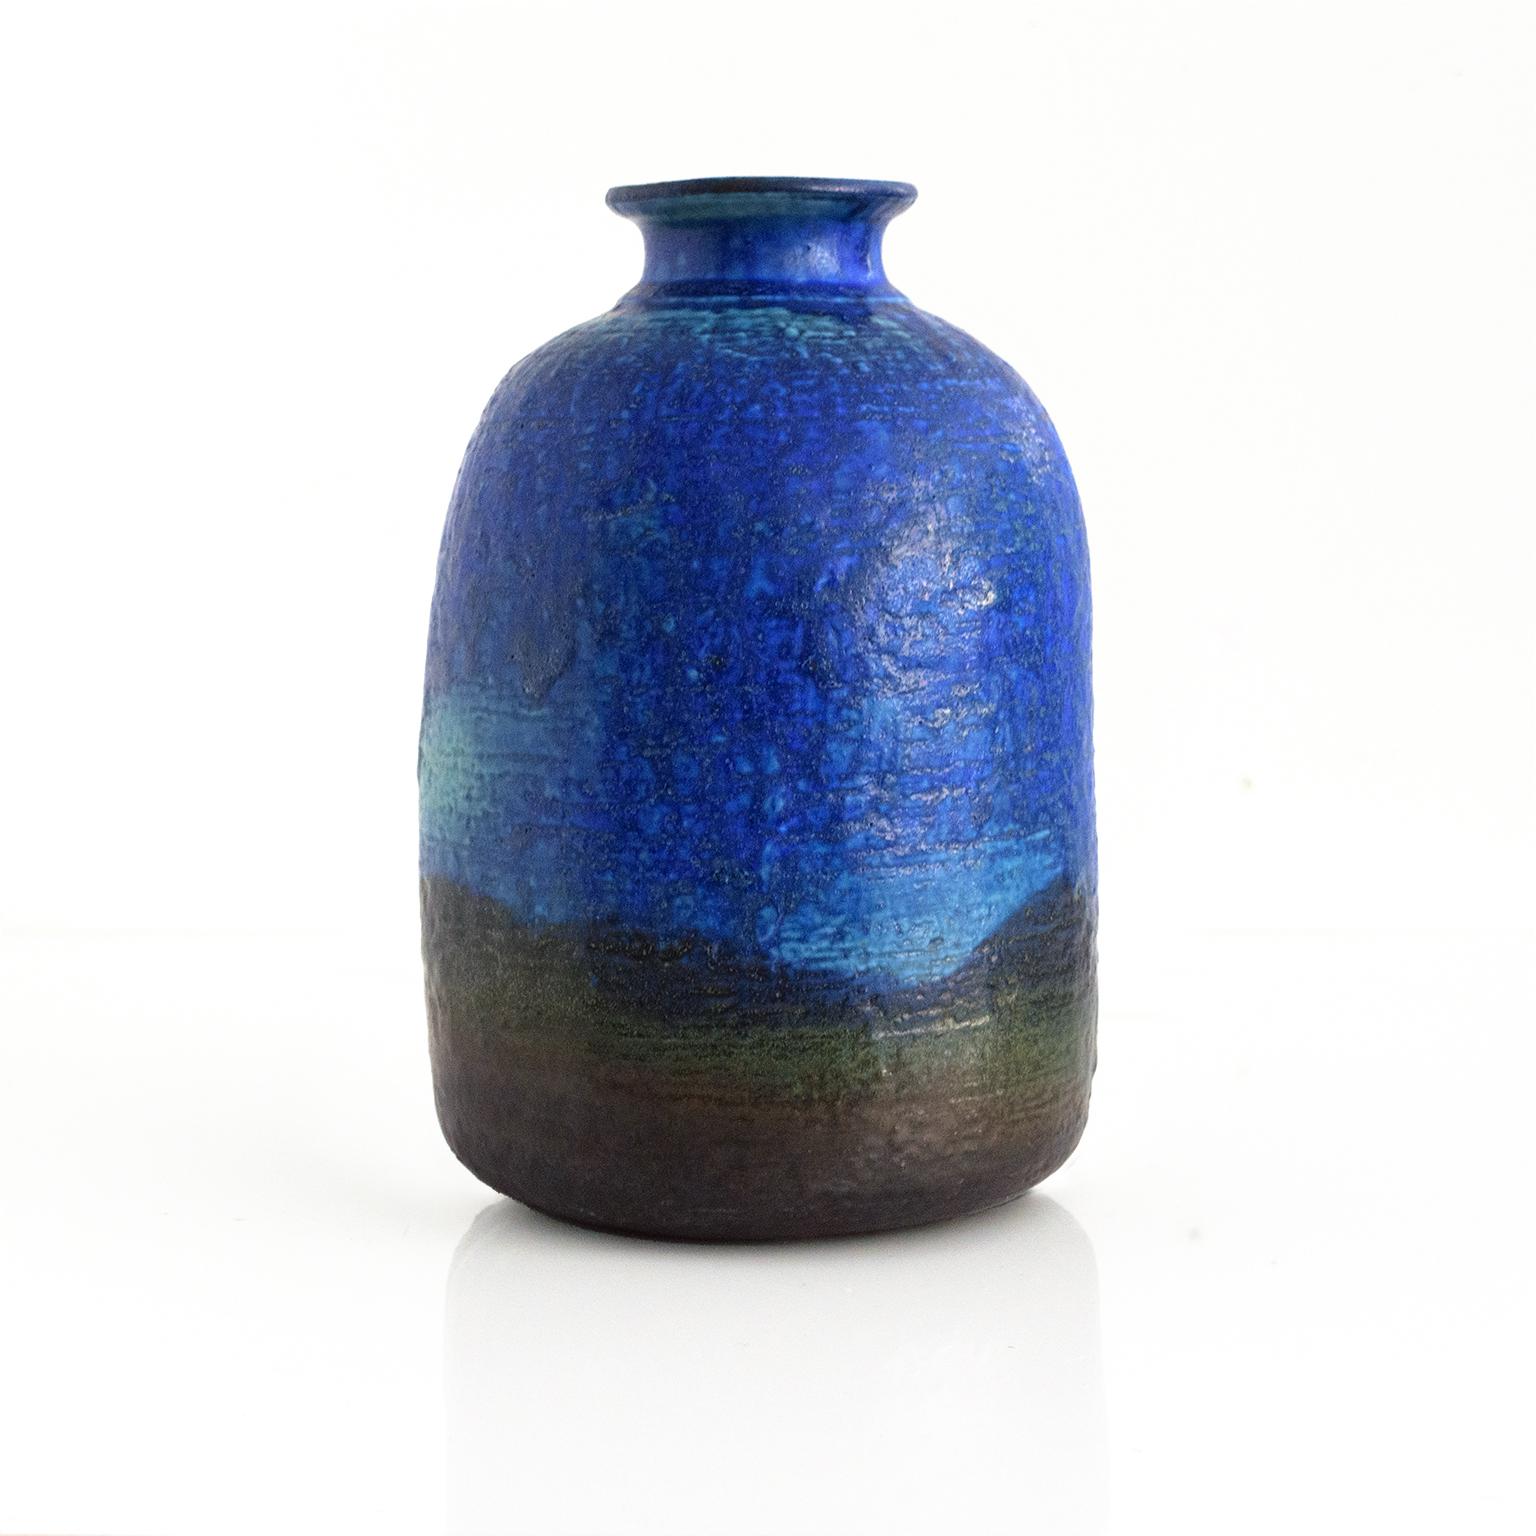 Scandinavian Modern artist Francesca Mascitti-Lindh hand thrown stoneware vase with mixed glazes of aquamarine blue and turquoise with deep green. Made at Arabia, Finland circa late 1960s.

Measures: Height: 10” Diameter: 6.5”.